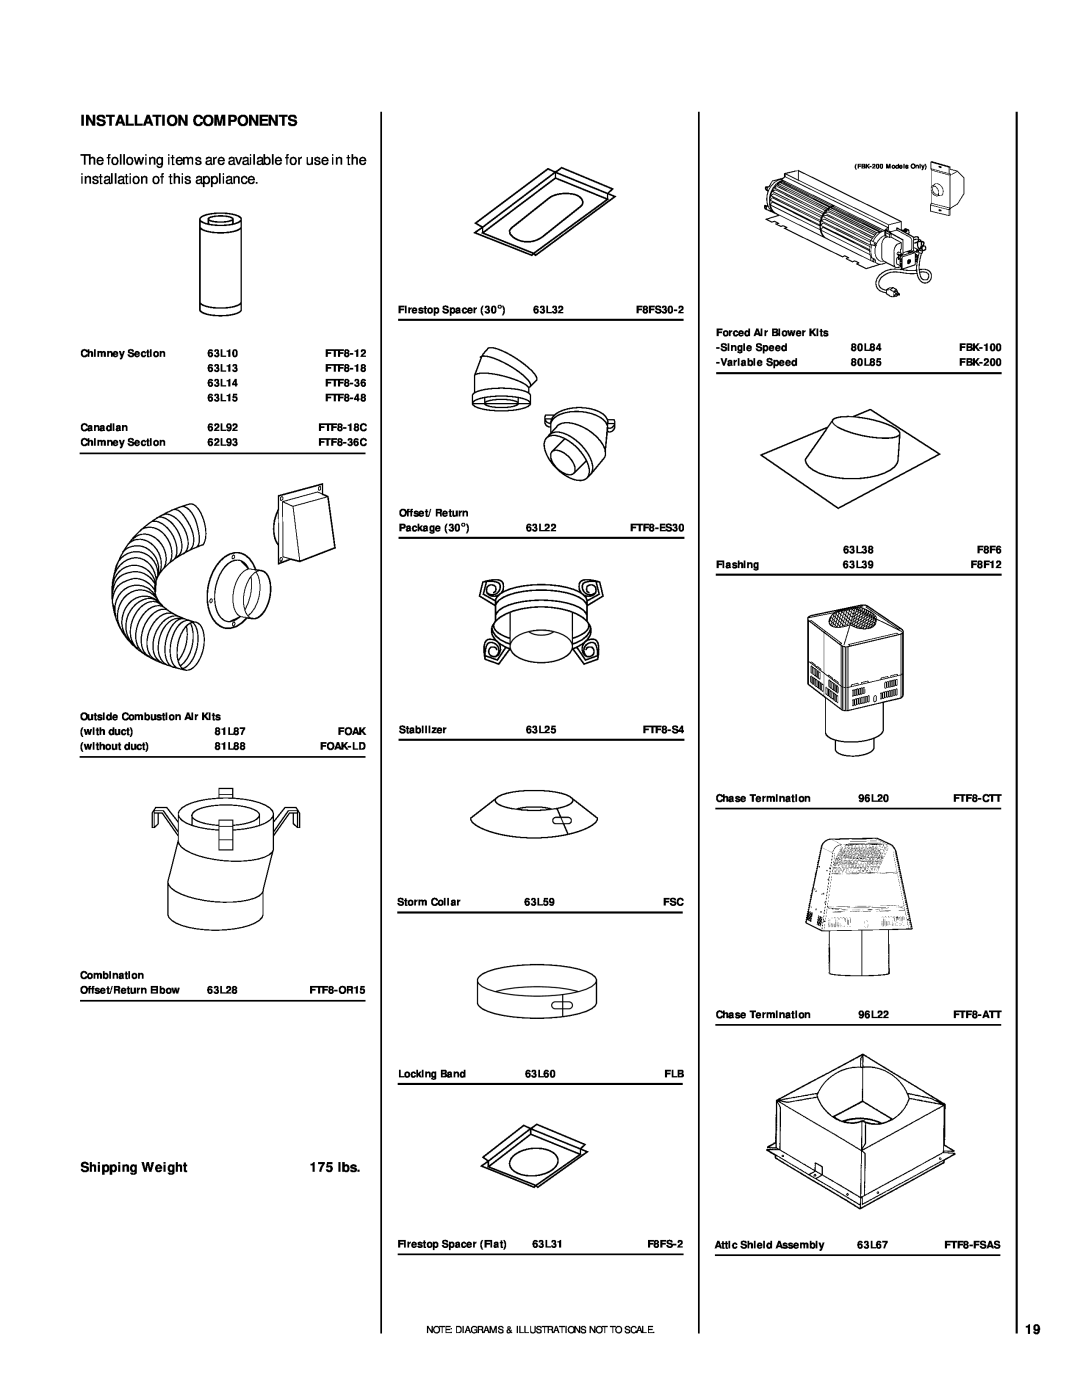 Linksys RDI-36-H HCI-36-H installation instructions Installation Components, Shipping Weight 